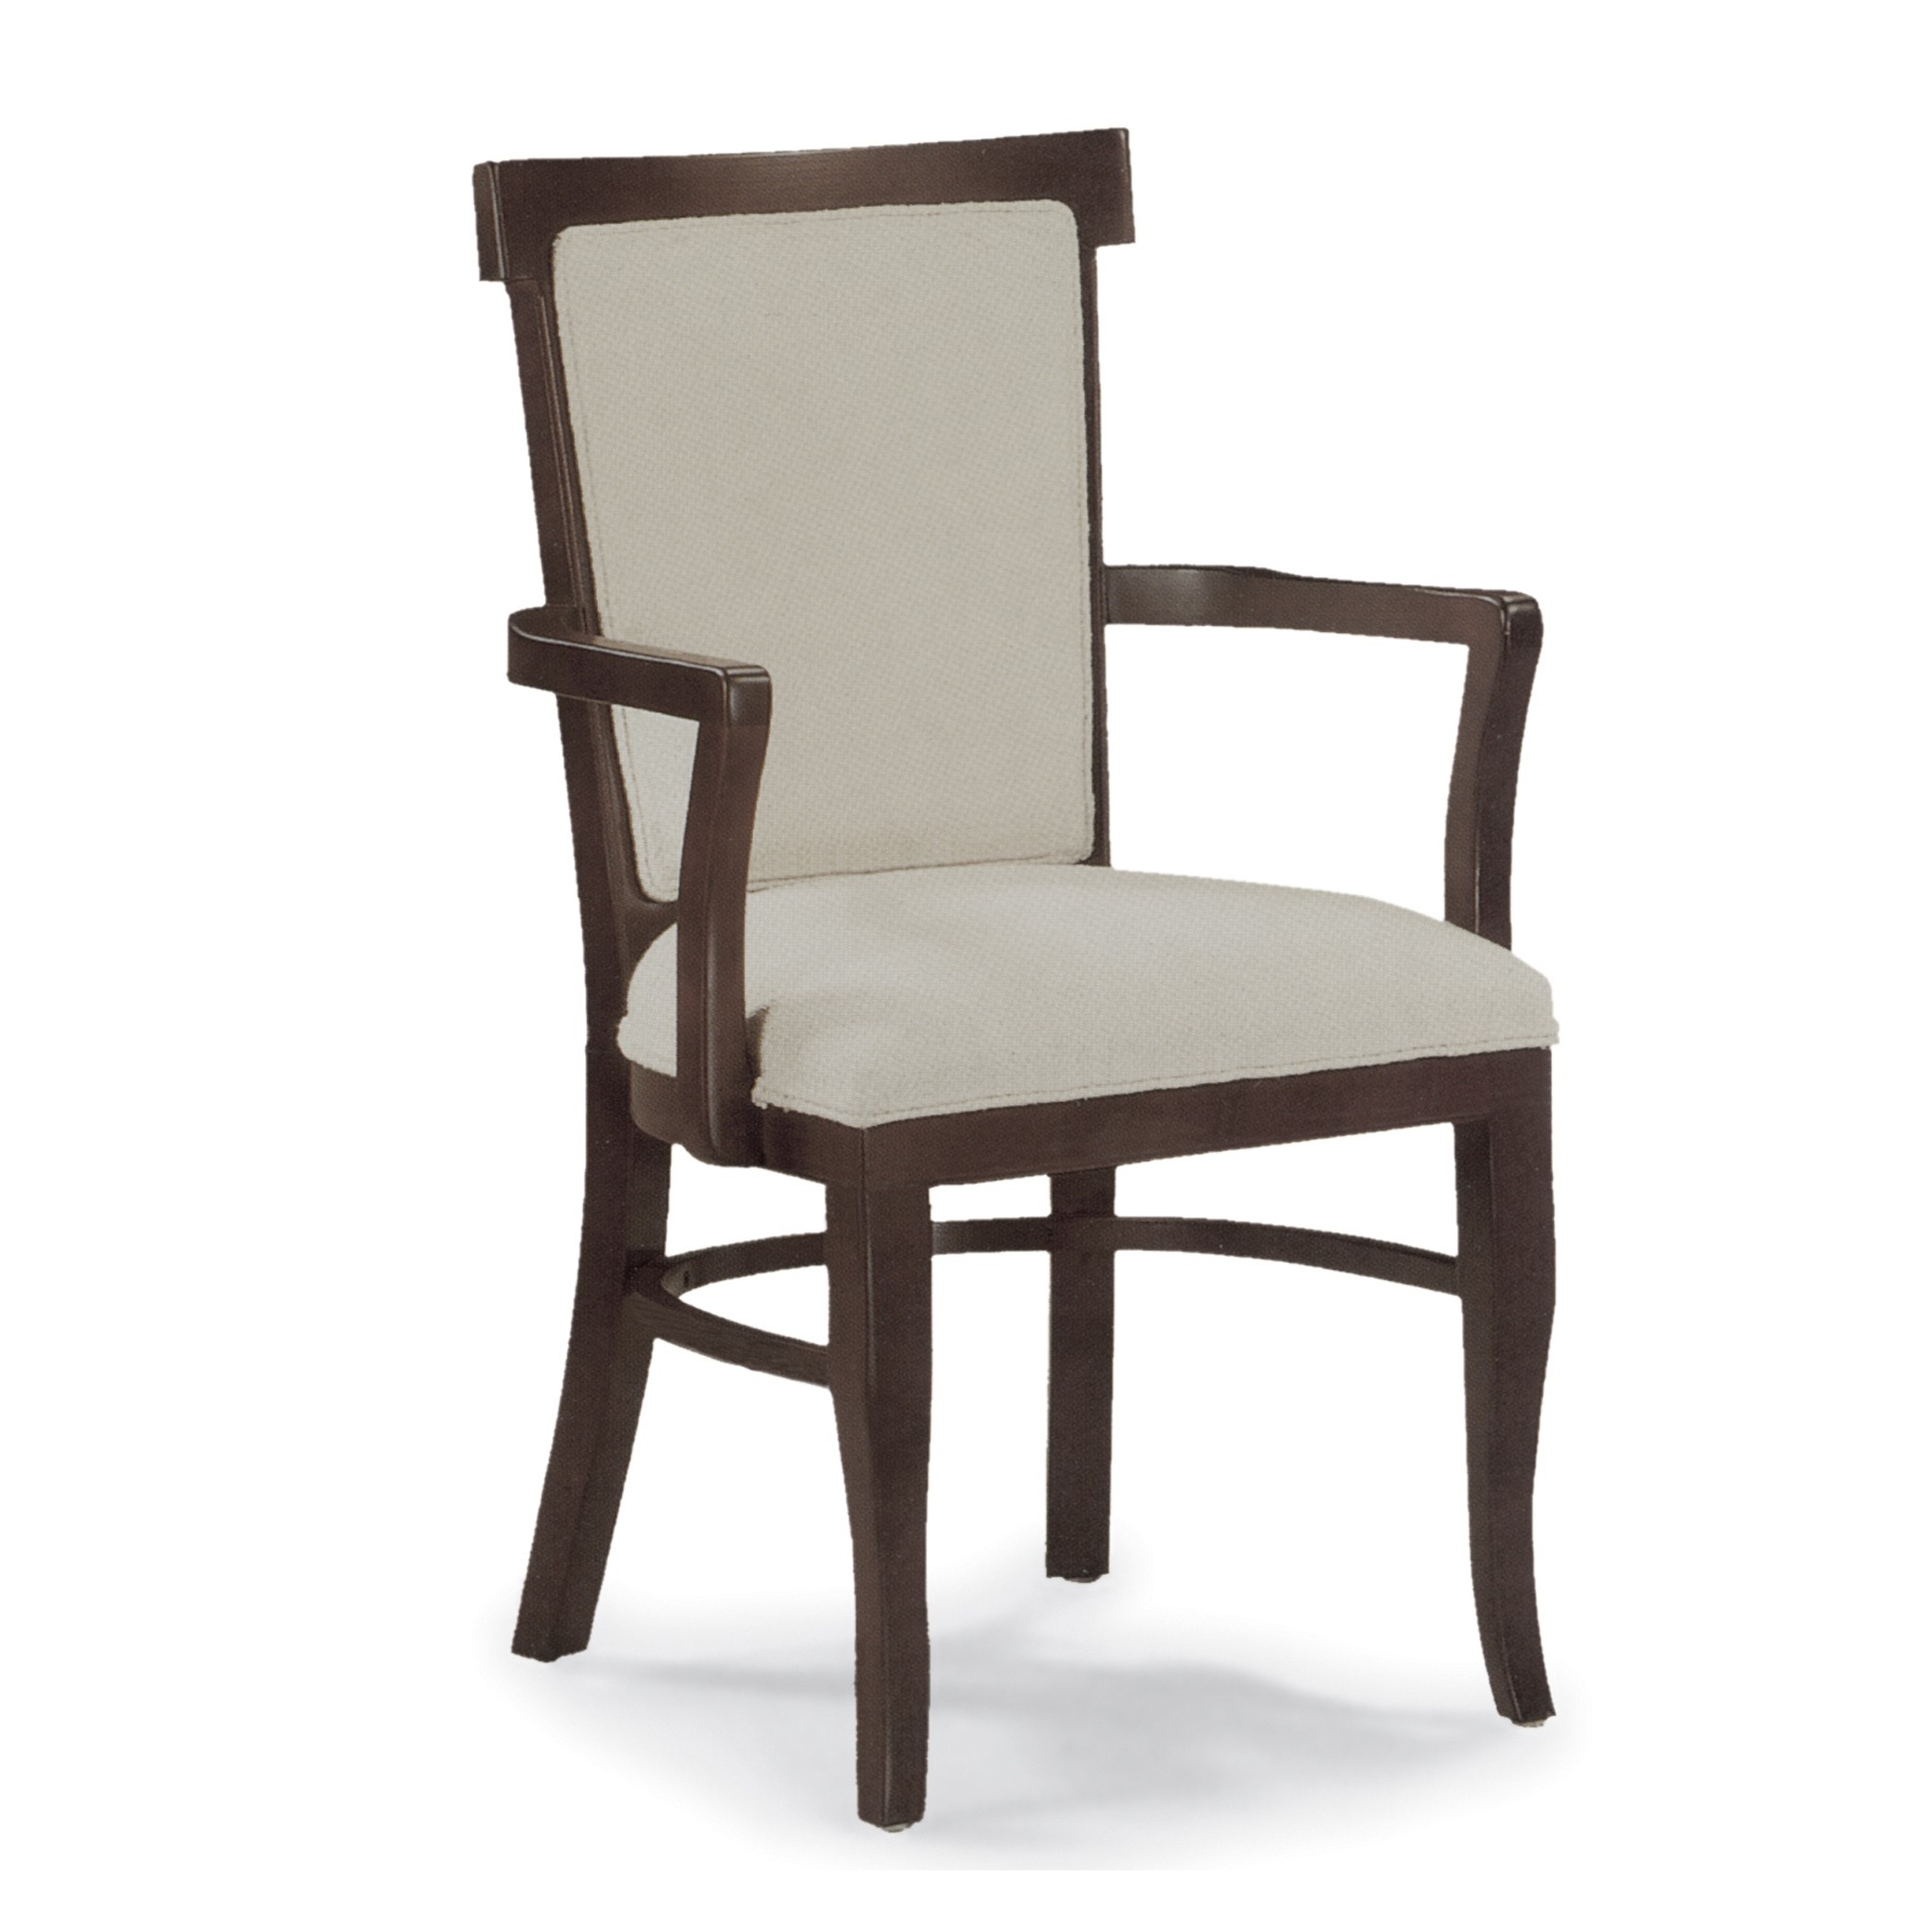 All wood chairs wood arm chair g5006